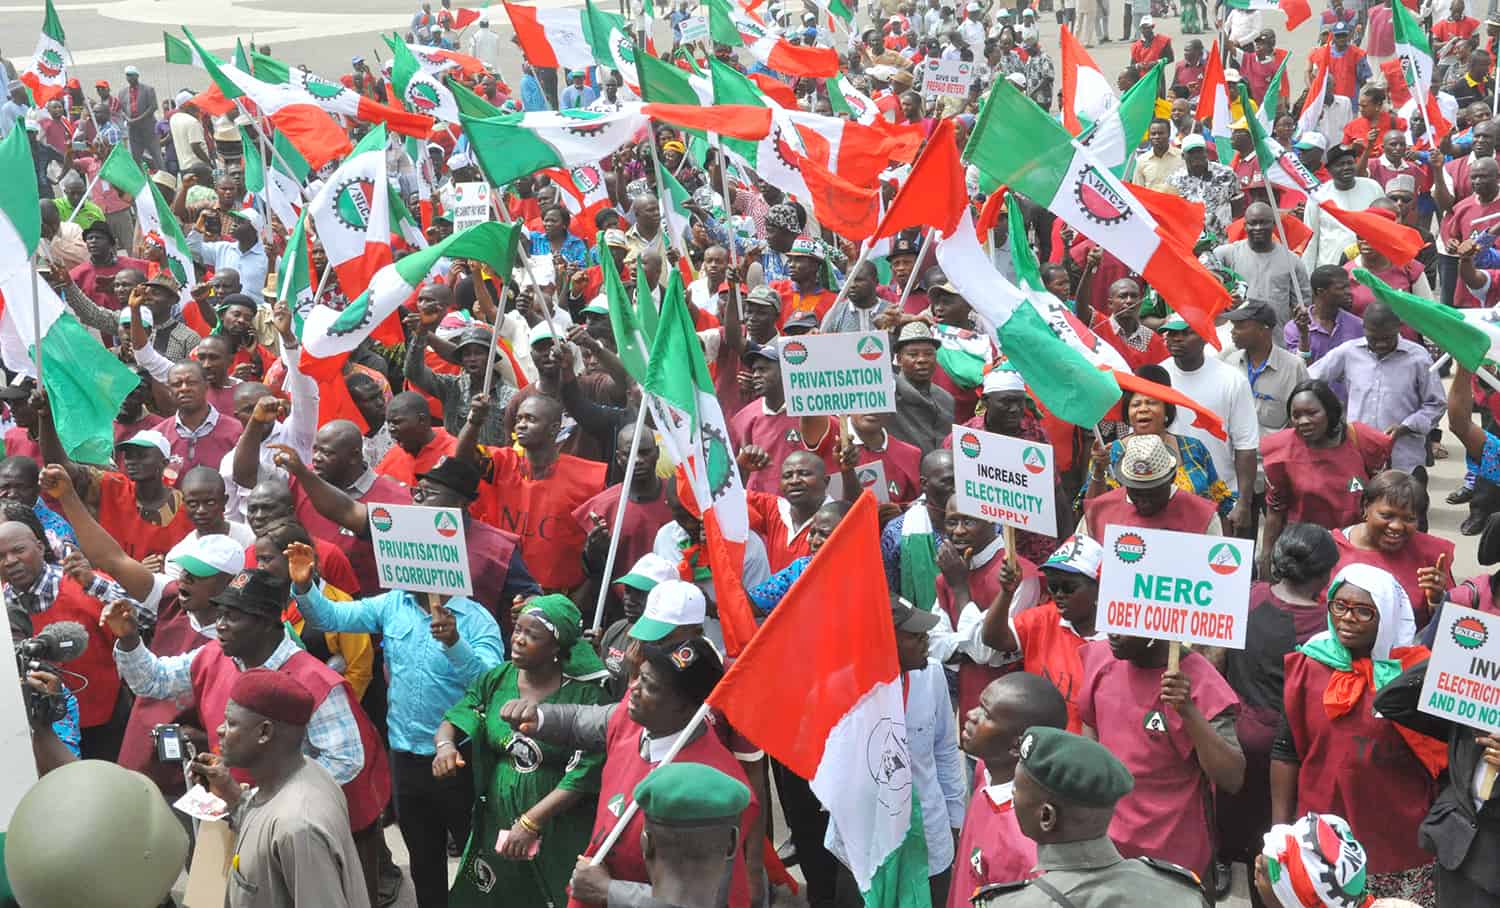 NLC condemns fuel price hike, calls for state of emergency